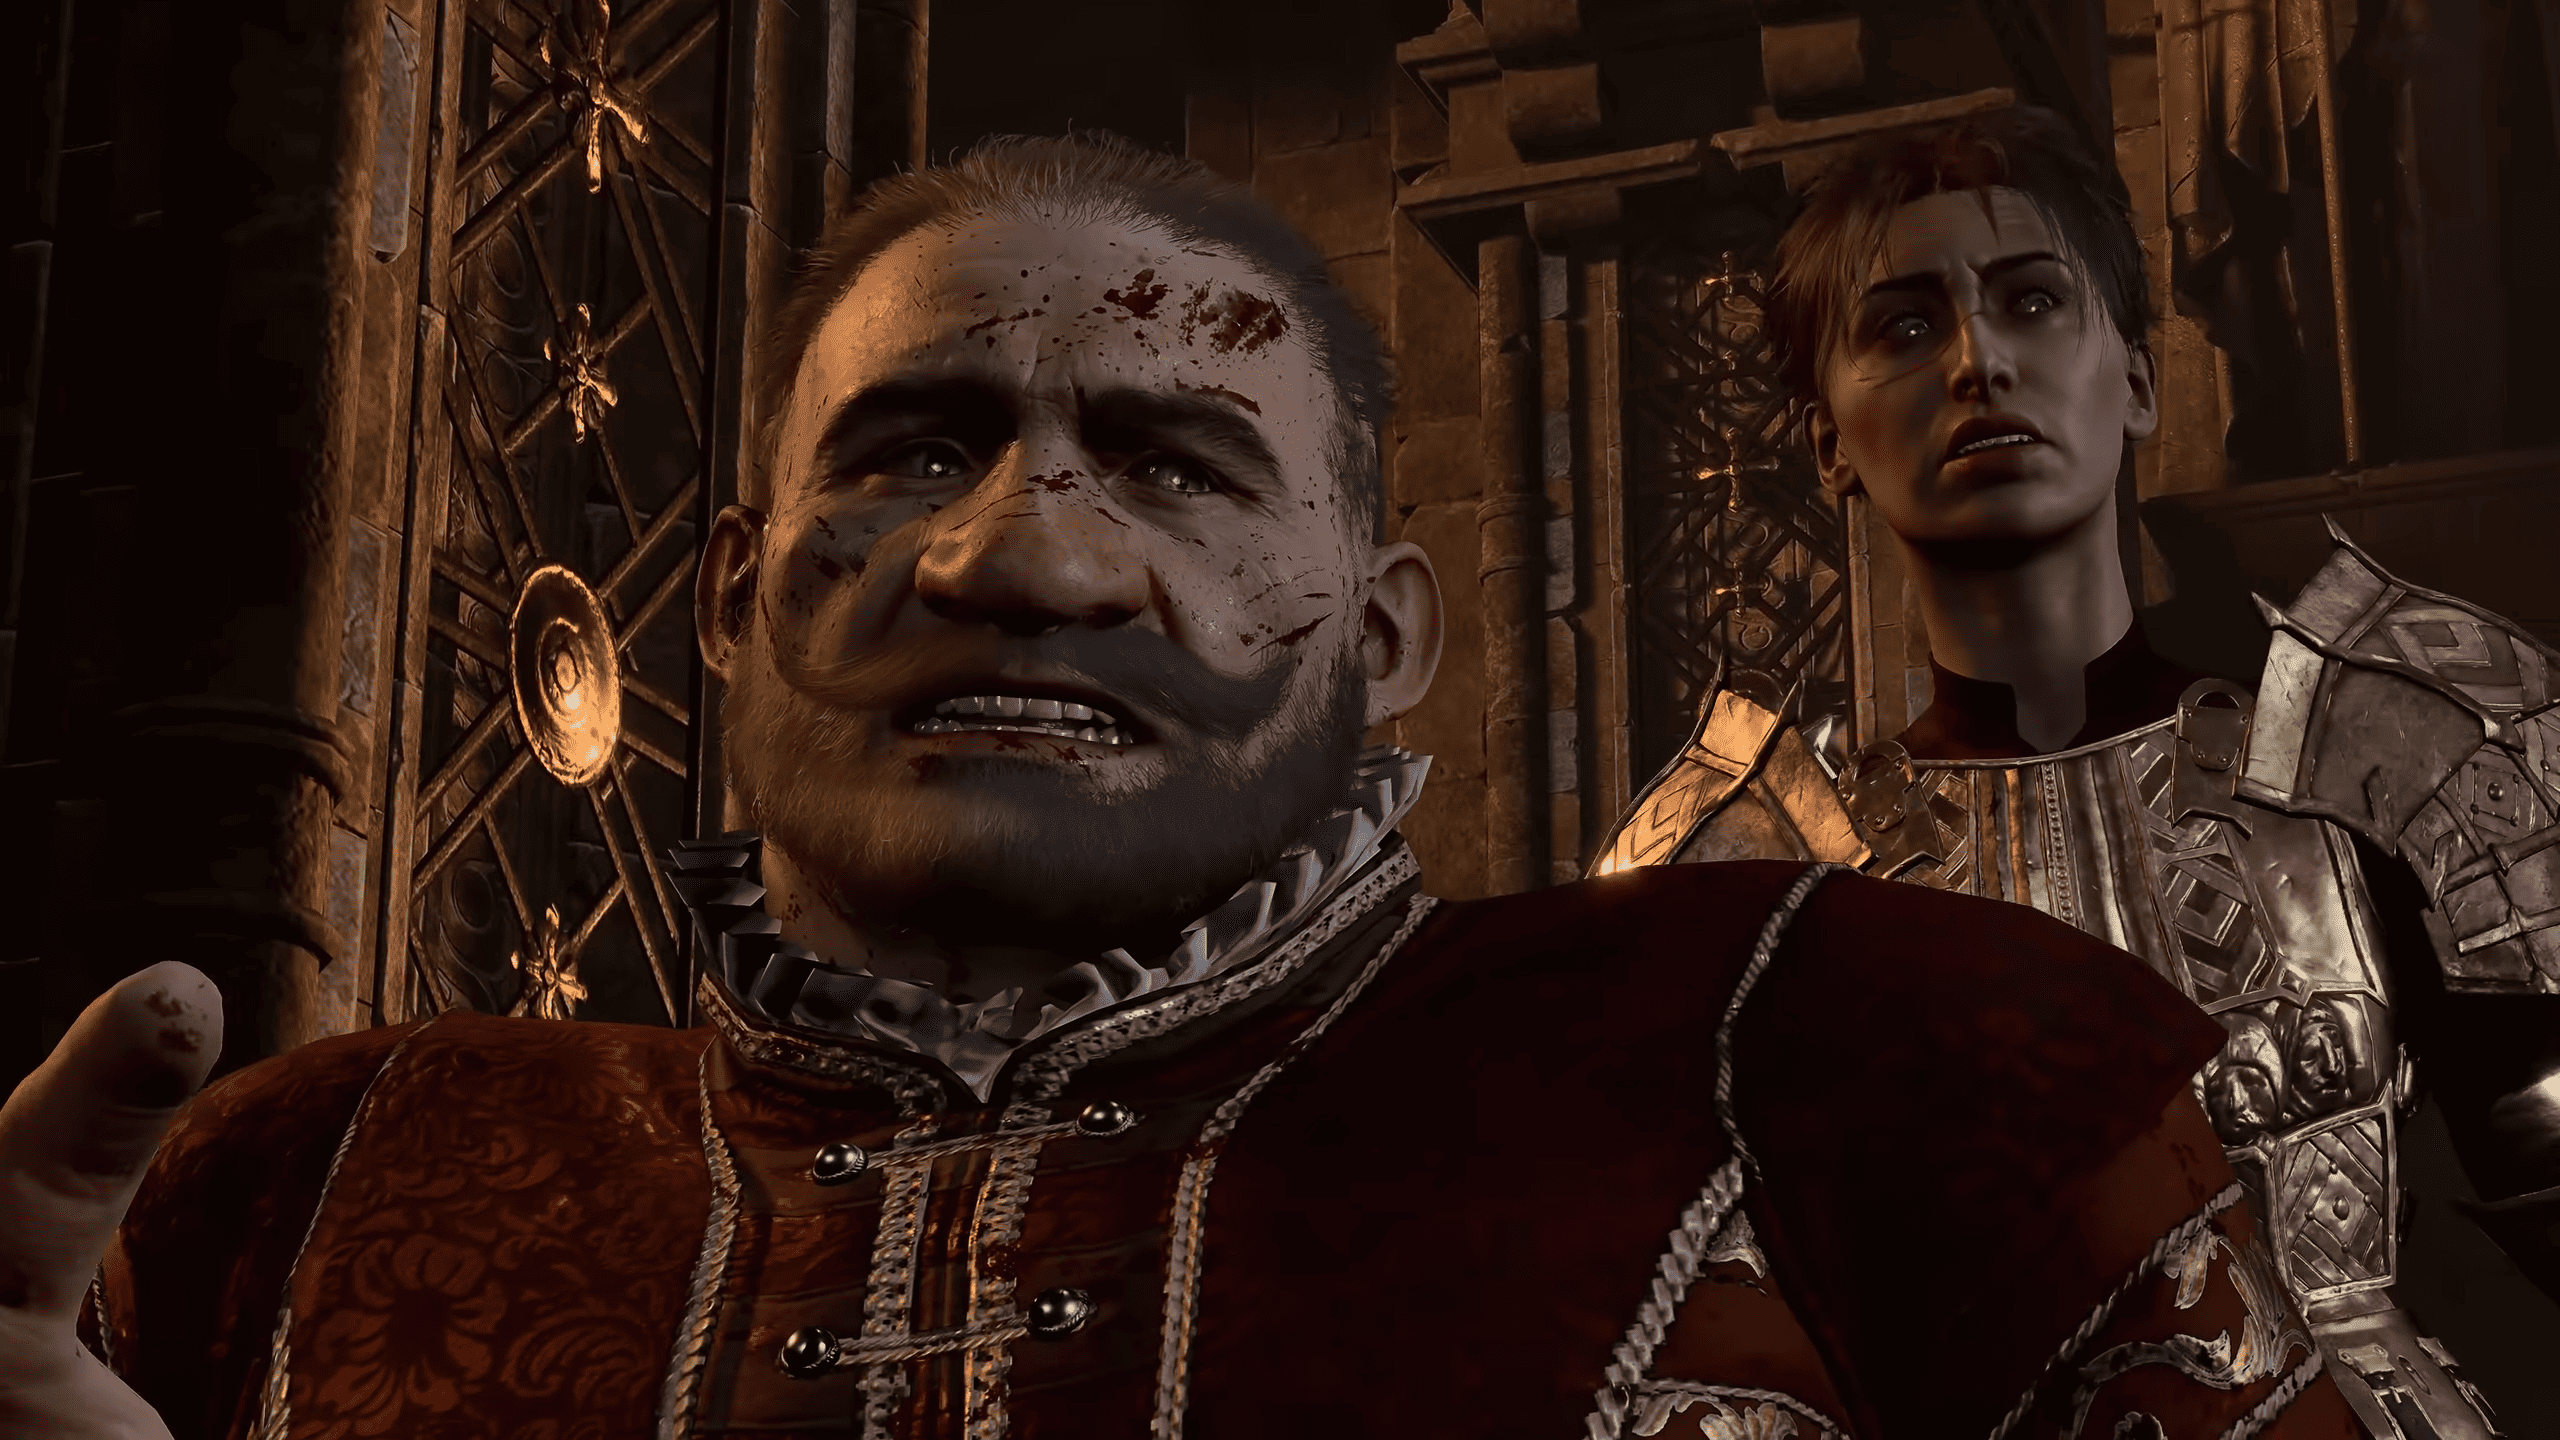 Baldur's Gate 3 Game Pass: A close-up of two characters, one with blood on his face.